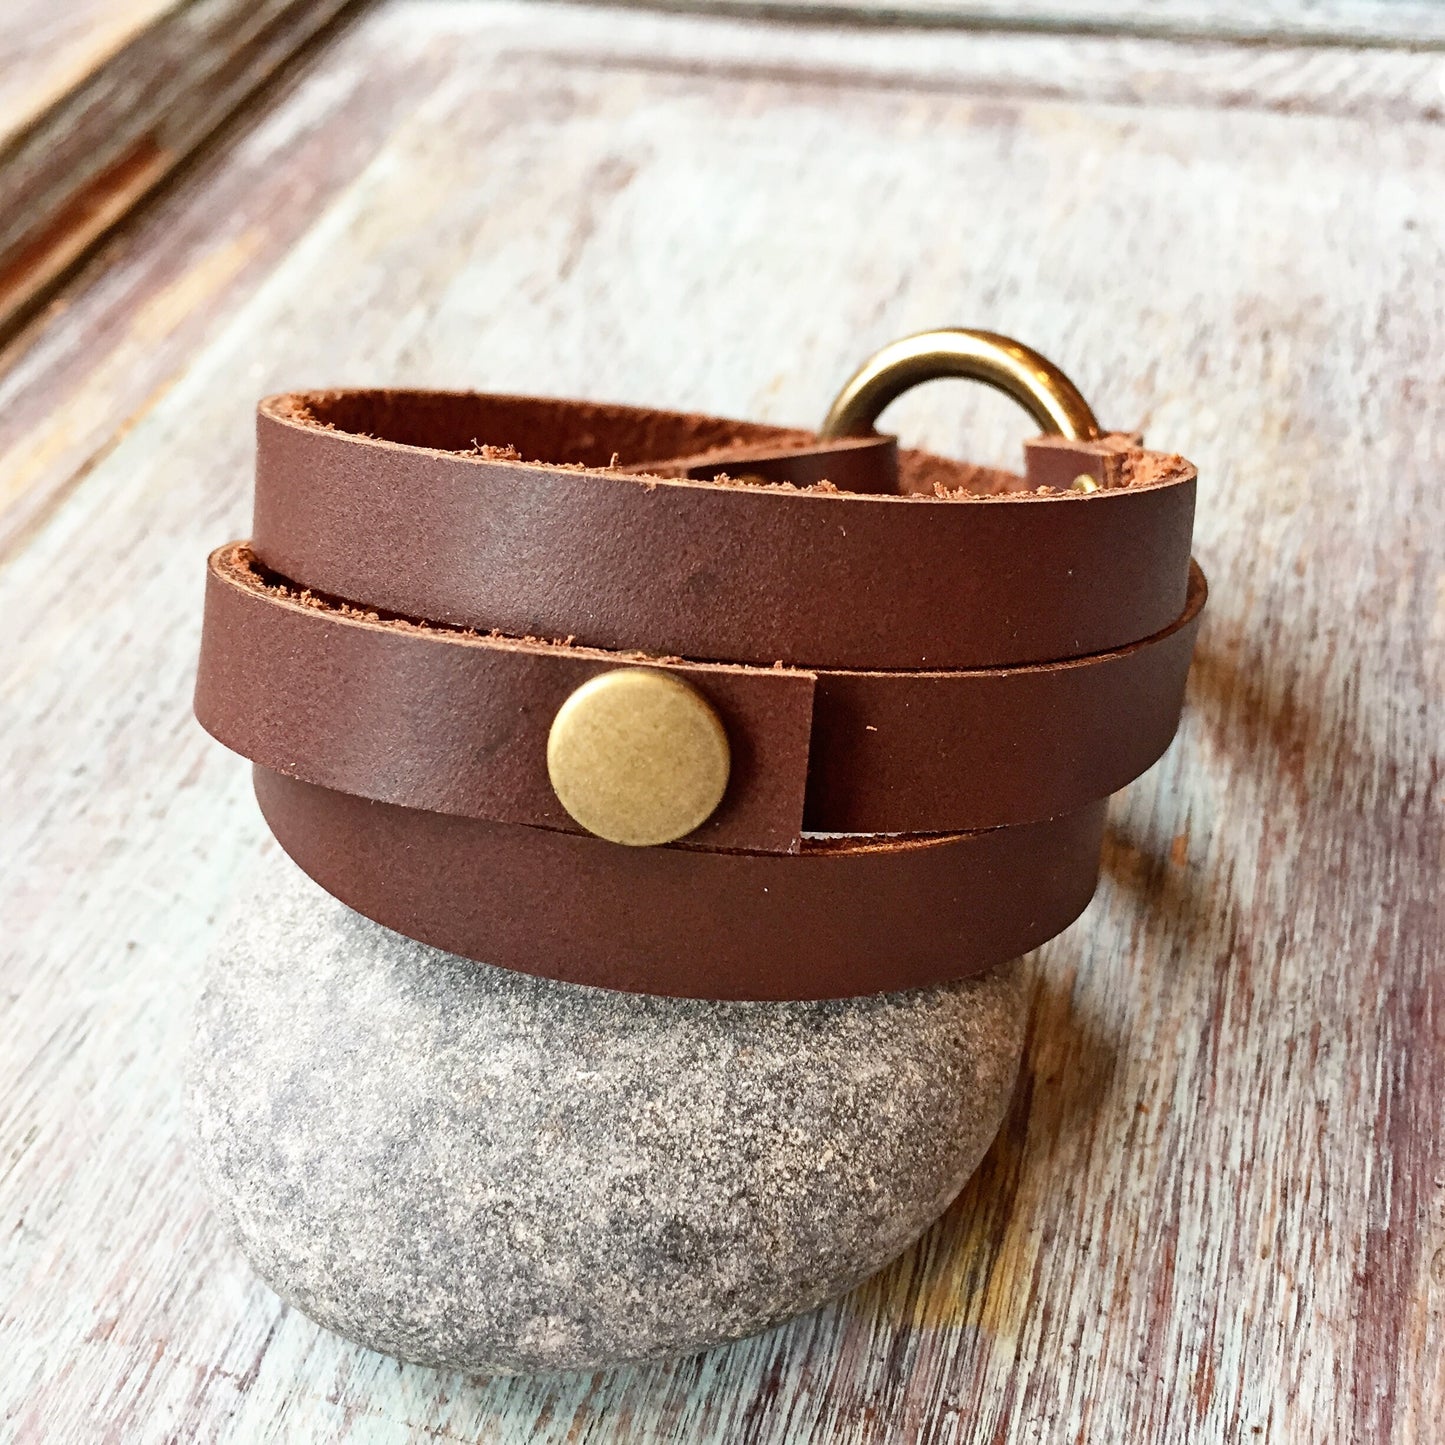 Everyday leather wrap bracelet, Womens leather wrap cuff, Leather bracelet for women, Leather jewelry, Layering jewelry, Anniversary